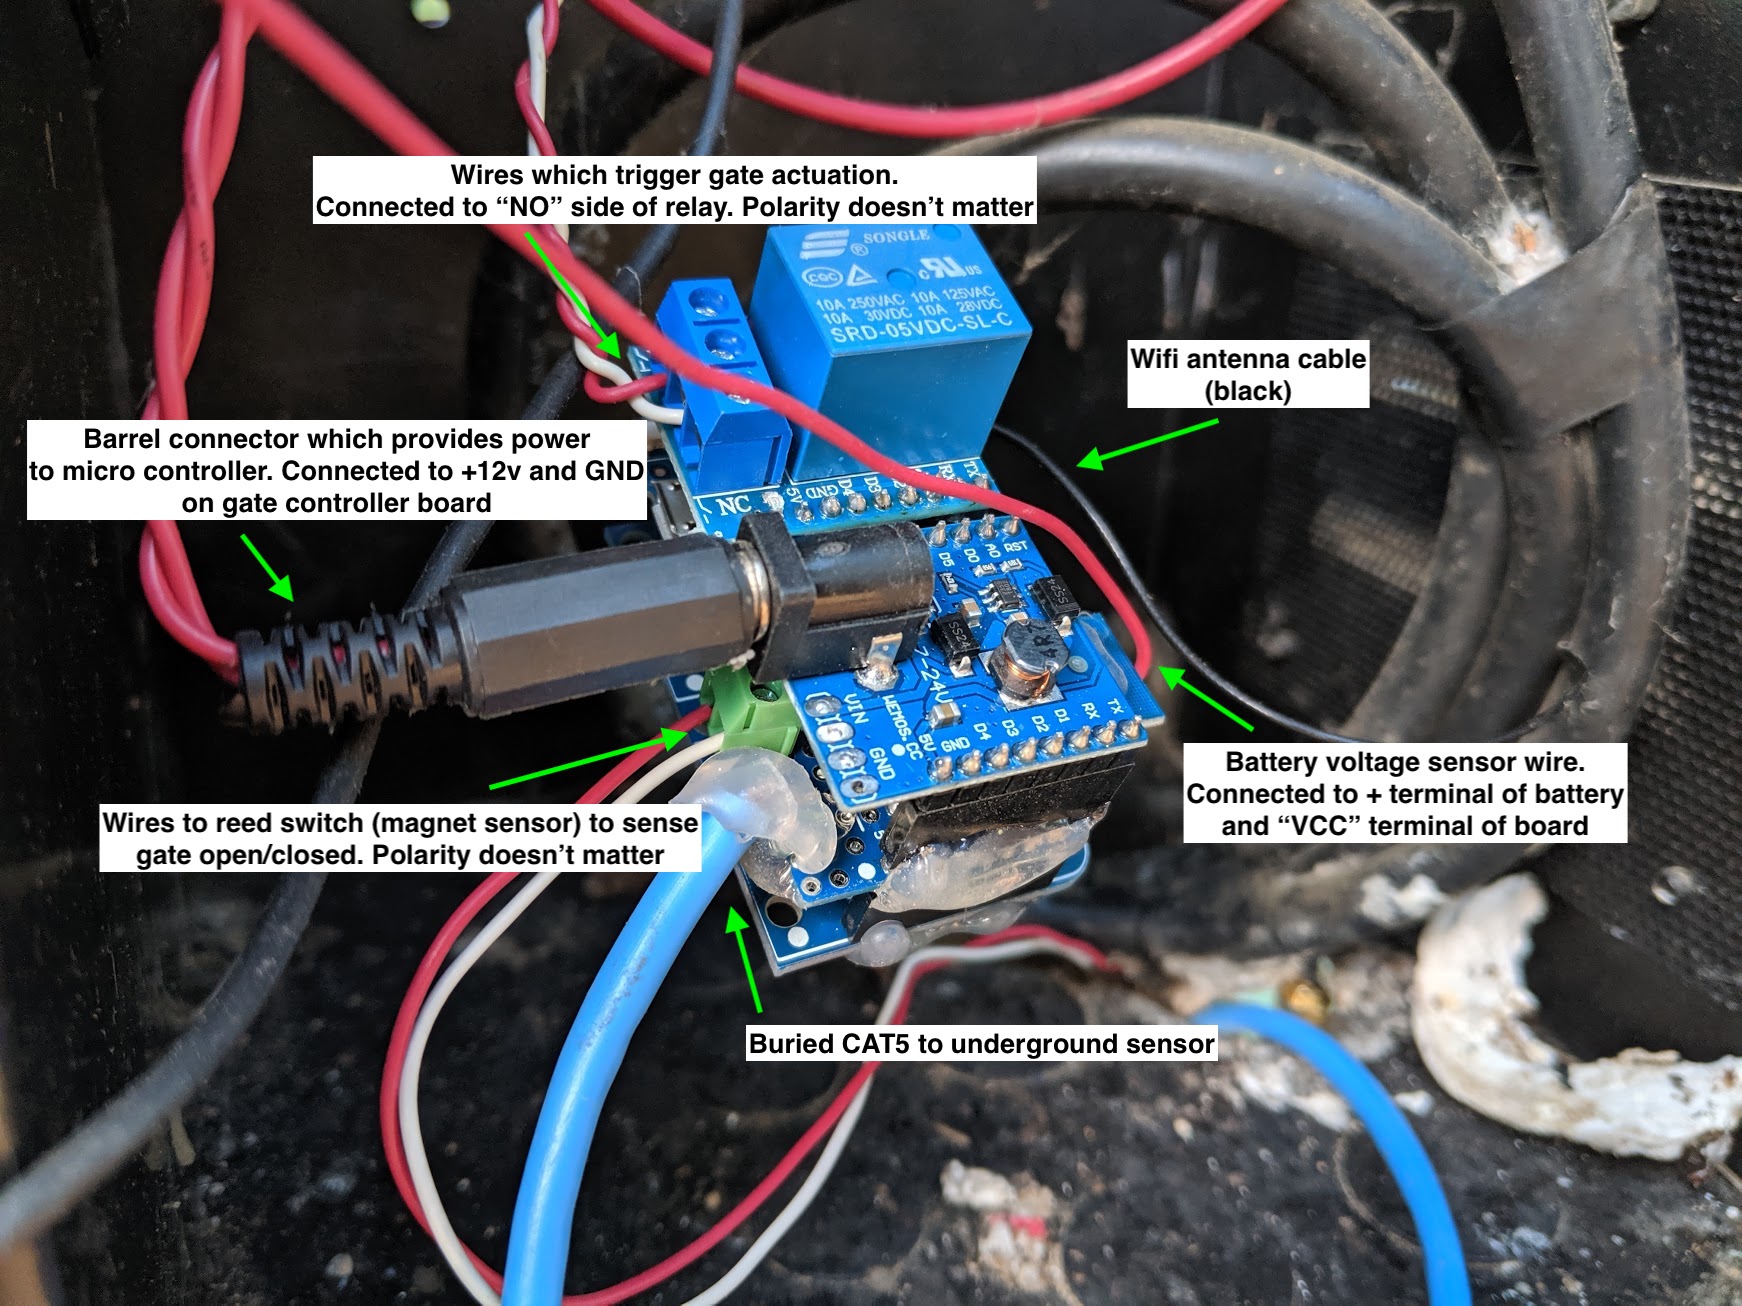 Wiring annotated